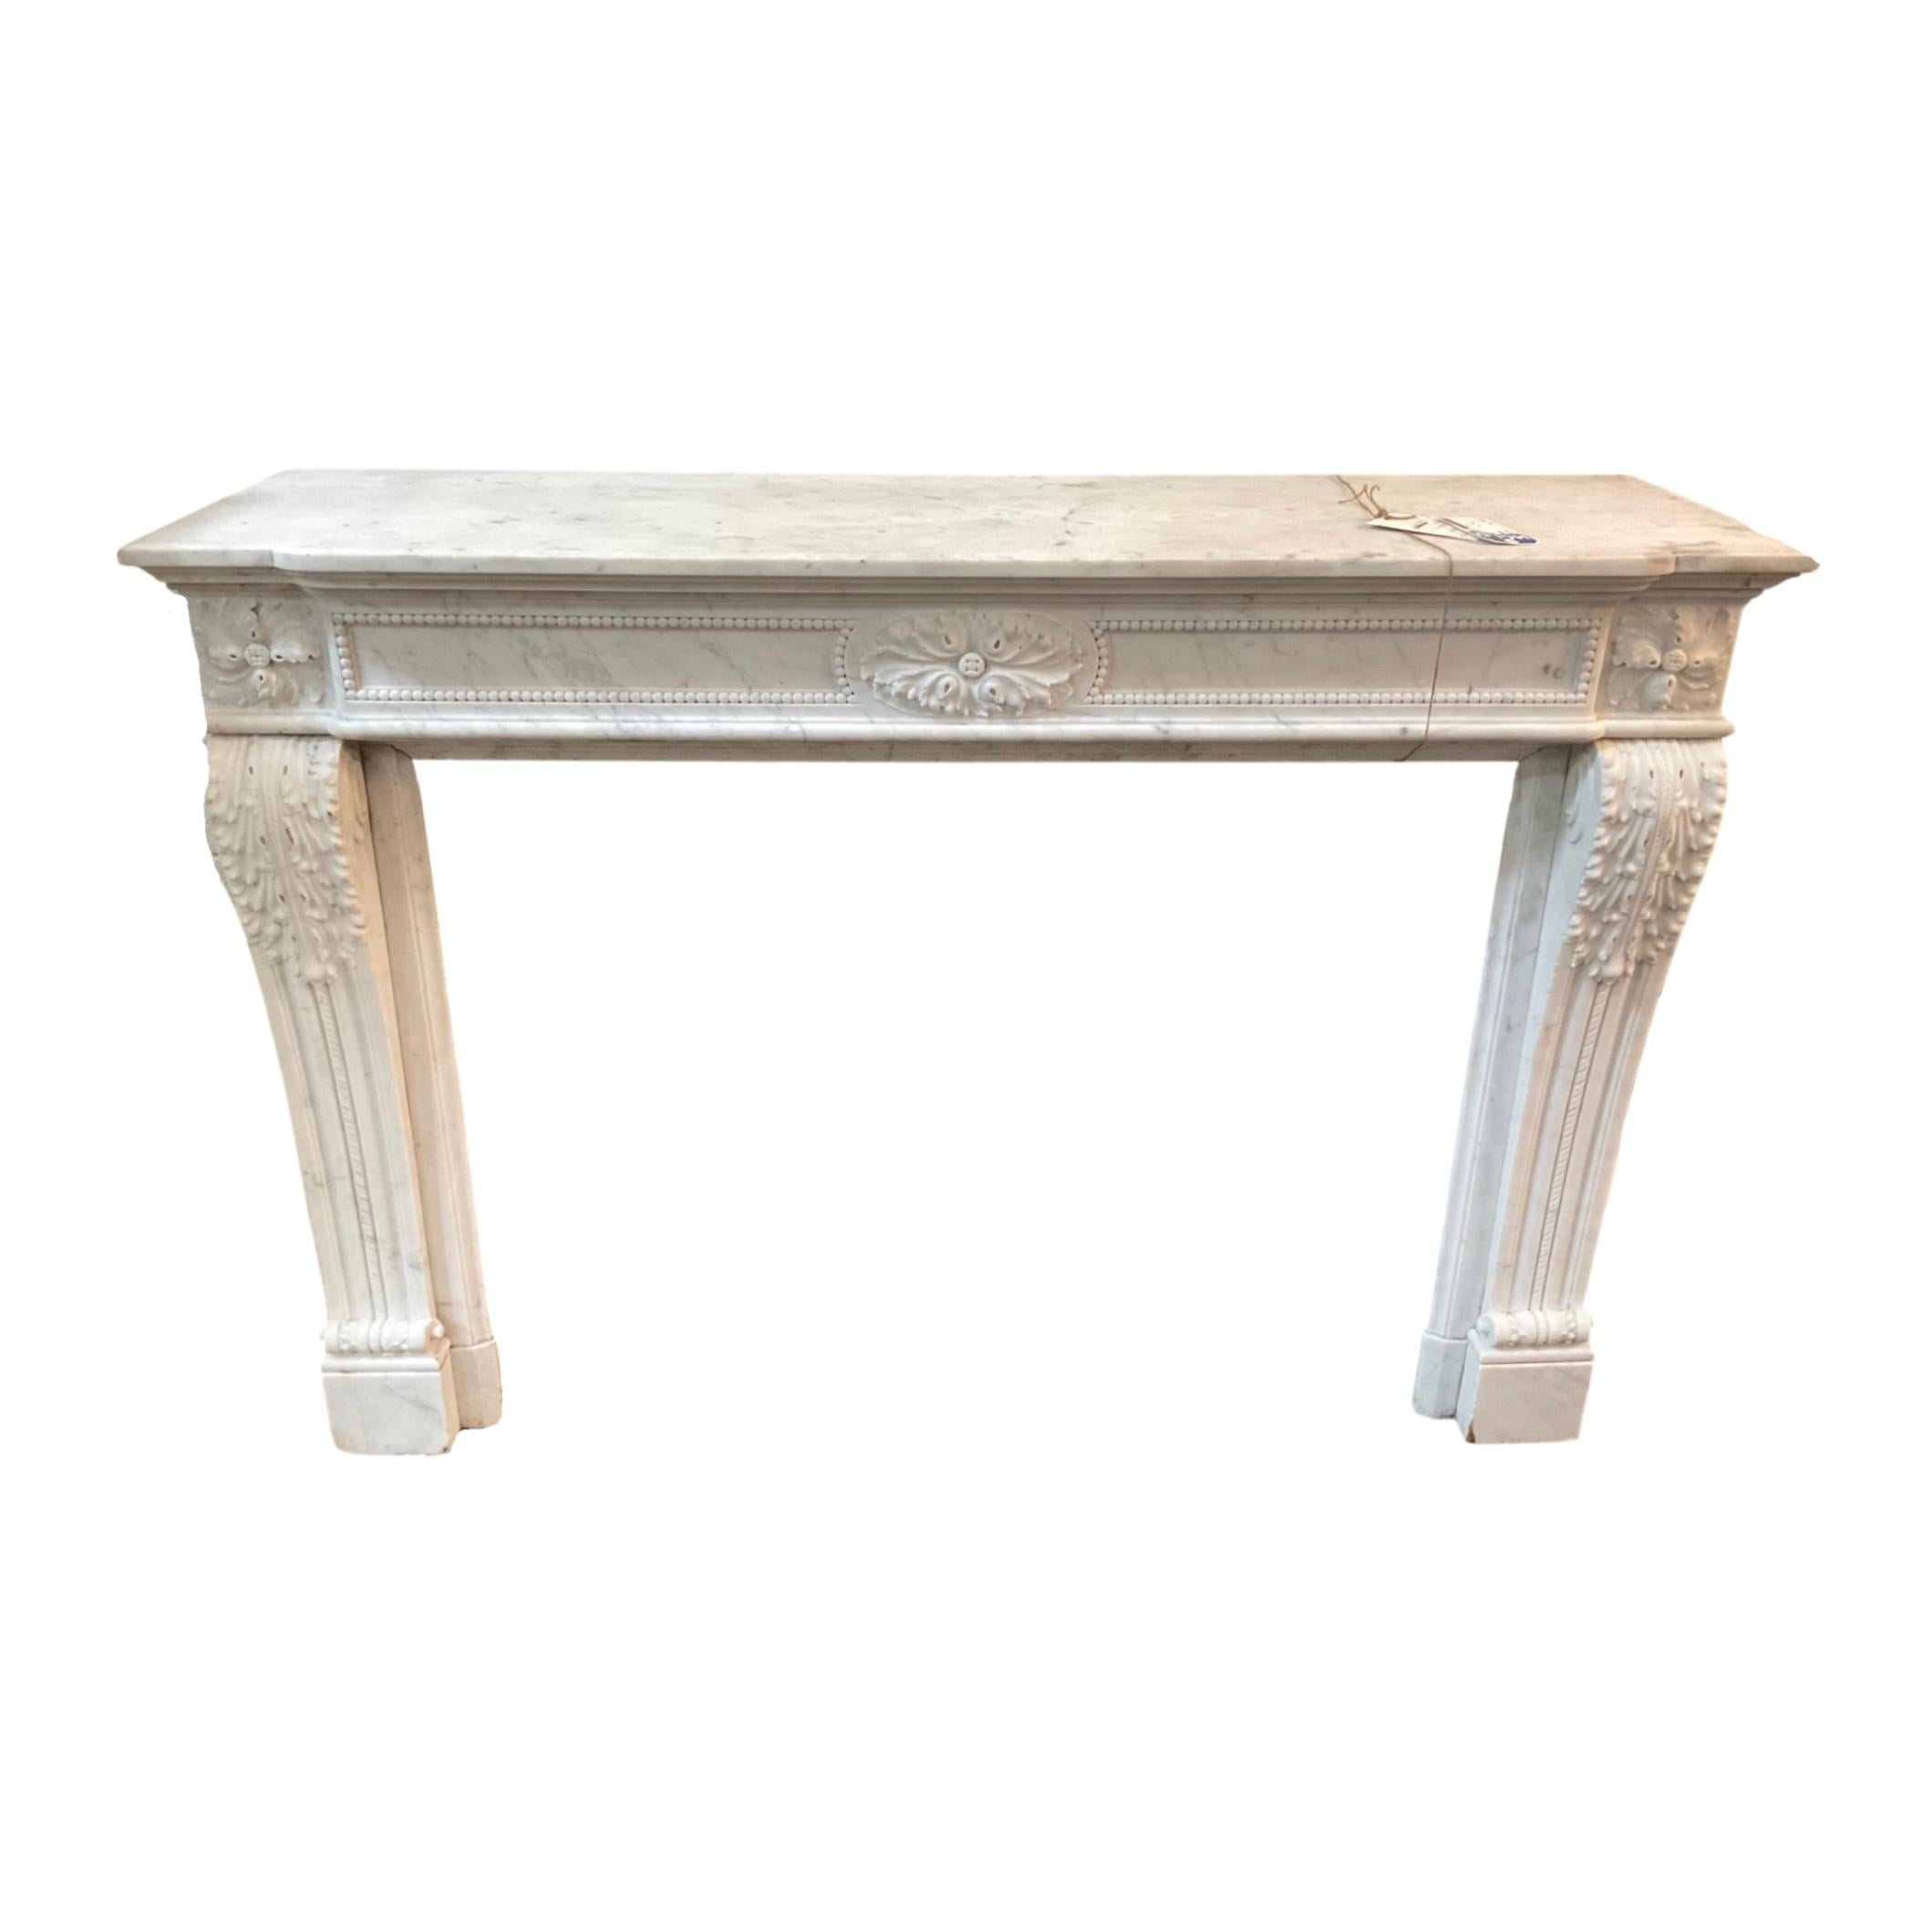 Louis XVI-style mantel. Made out of white marble stone. Originates from France. Circa, 1710. 



Measurements: 

W: 61